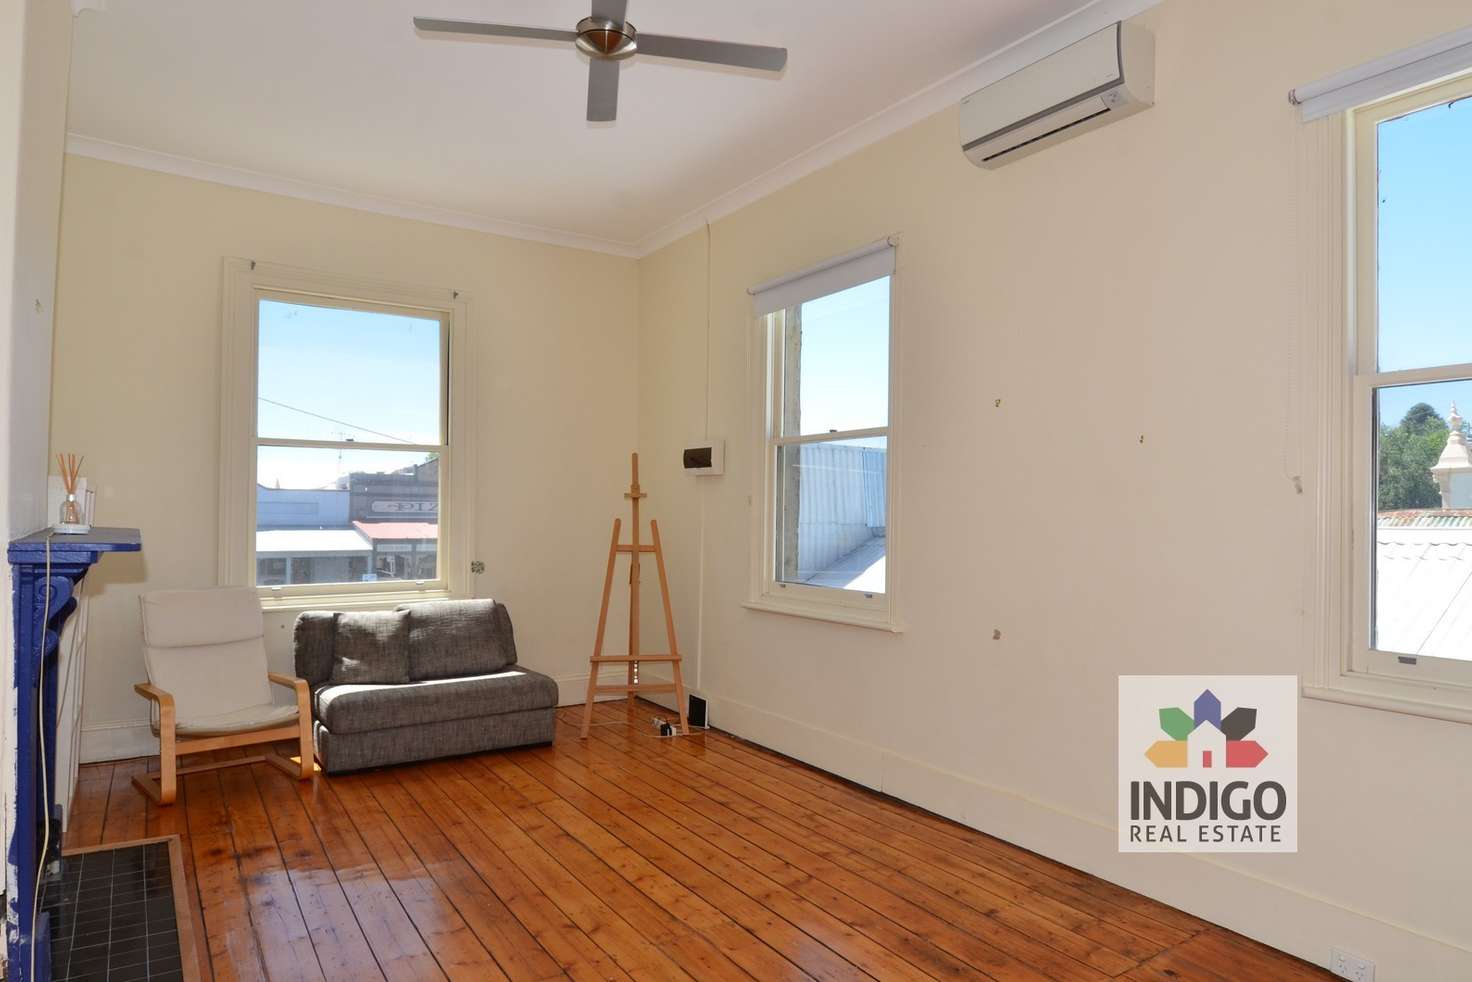 Main view of Homely apartment listing, 68 Ford Street, Beechworth VIC 3747